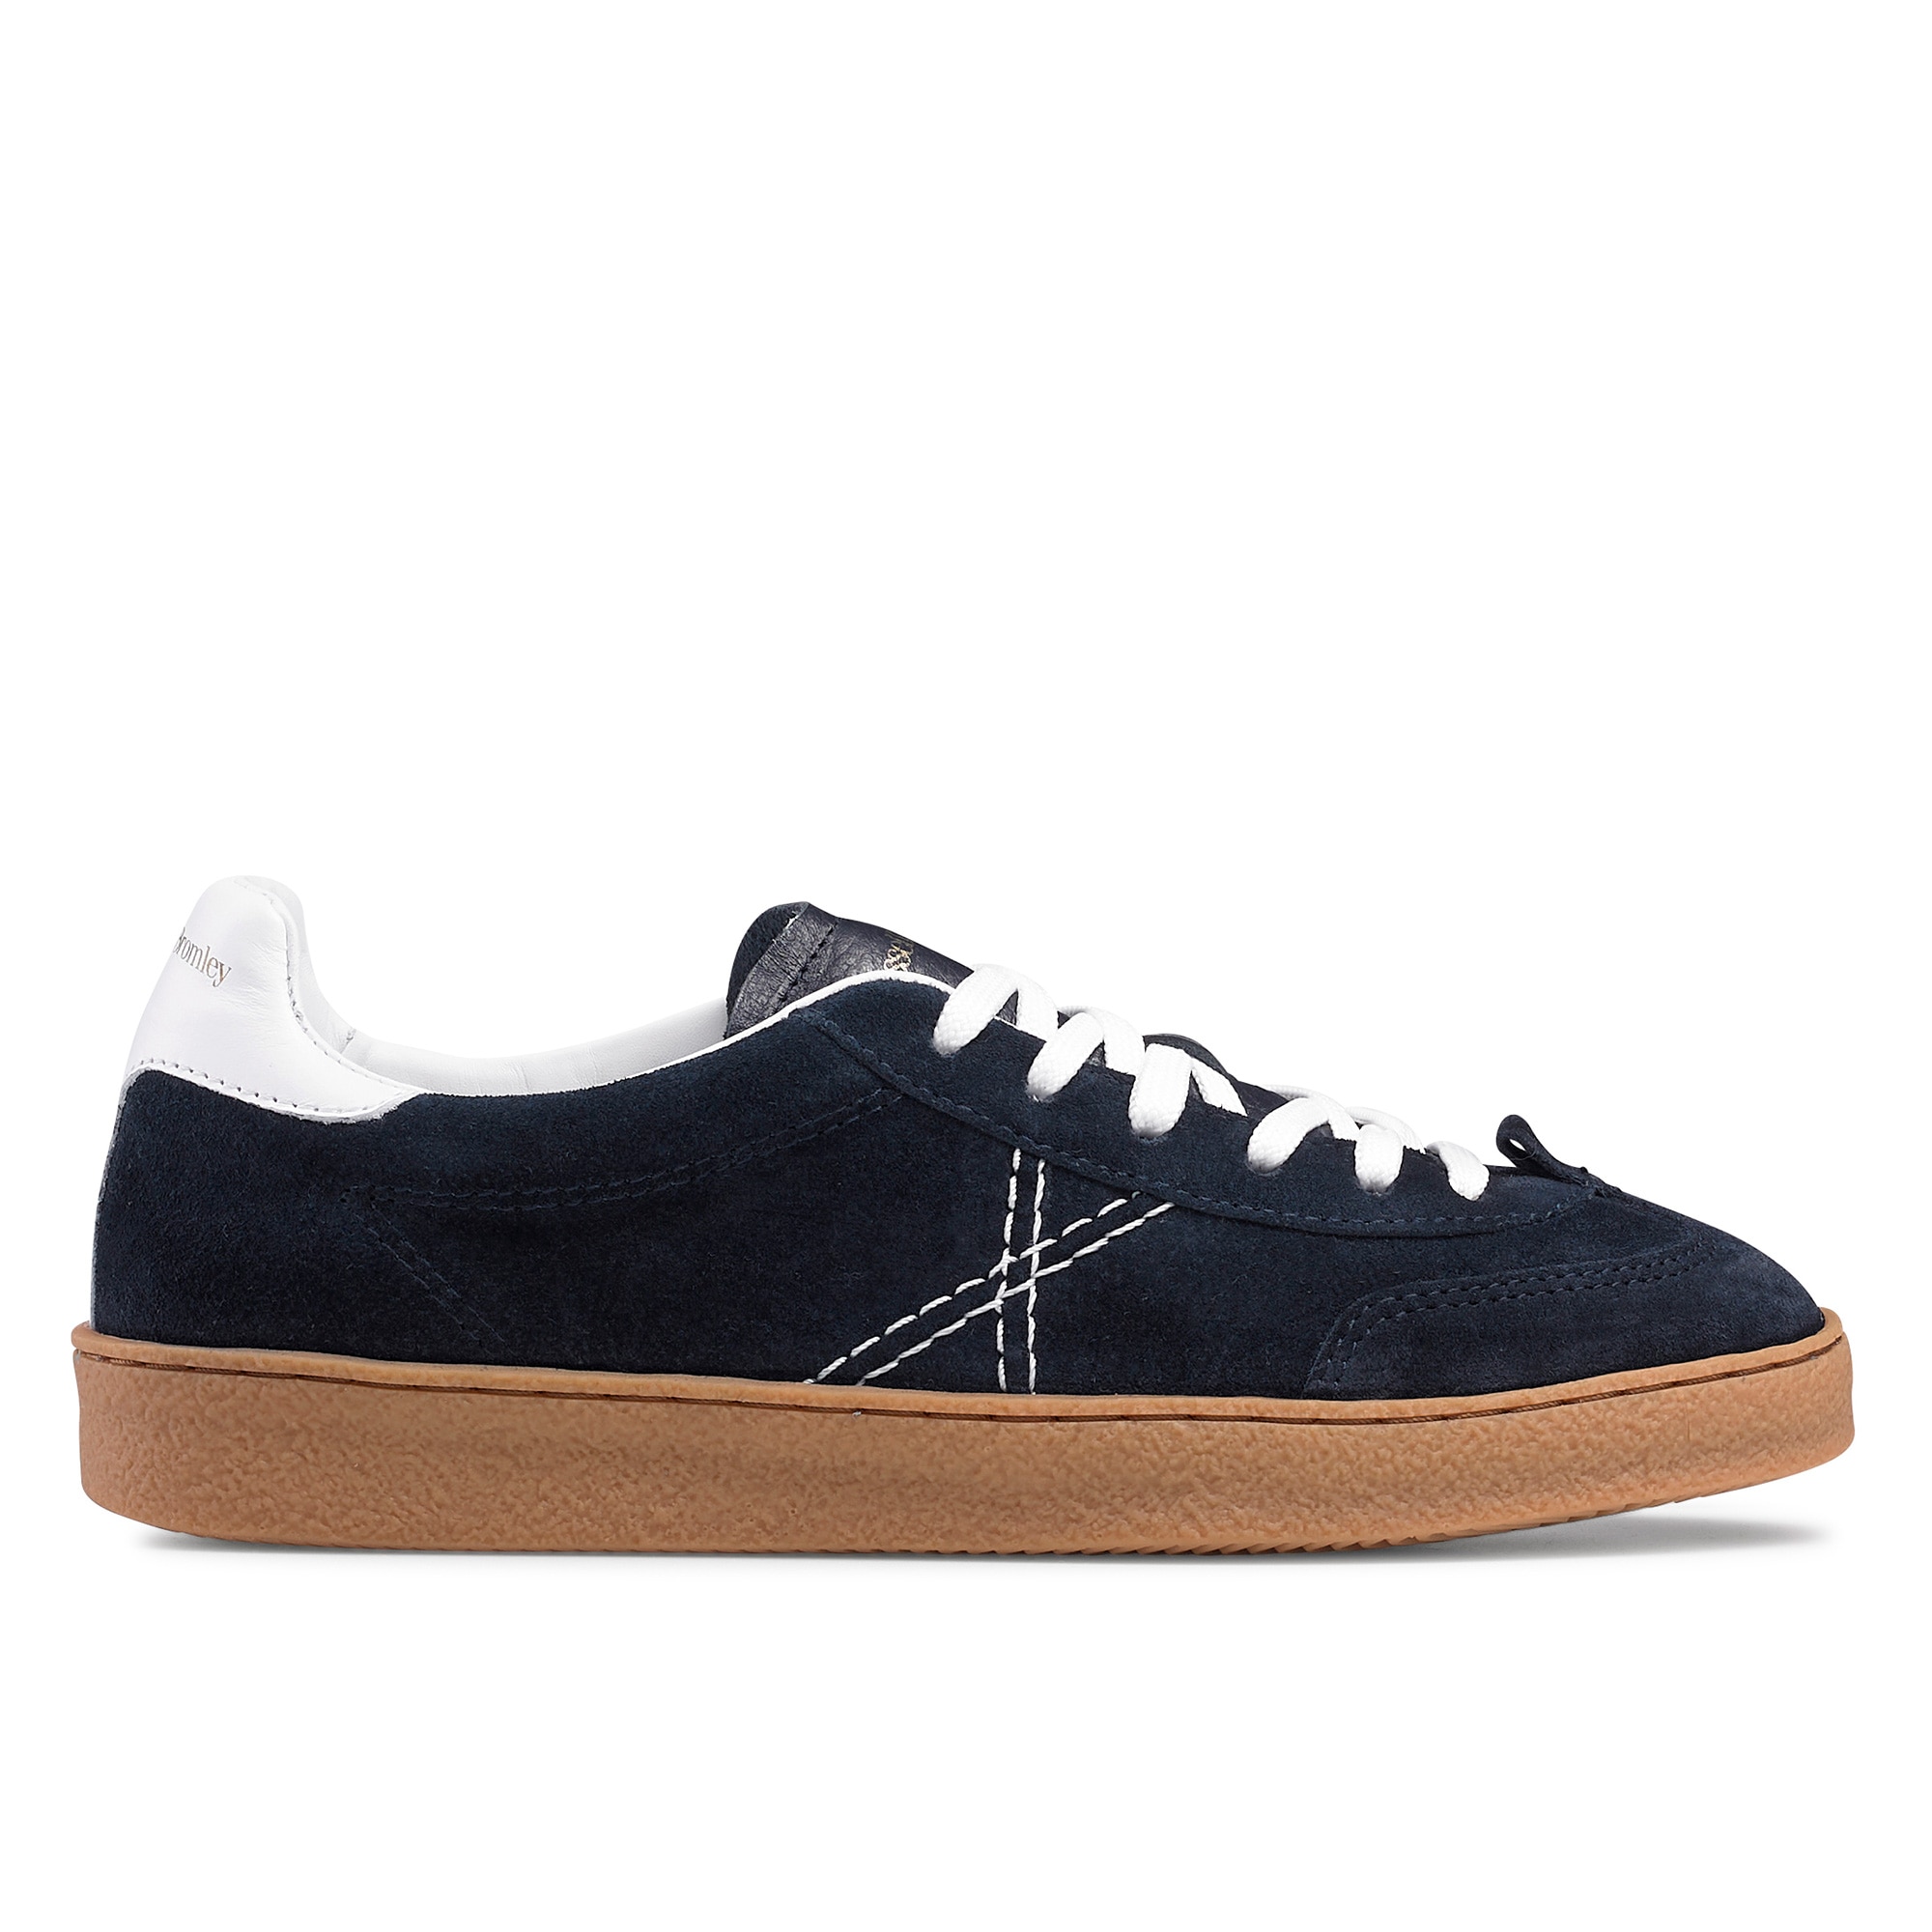 Russell and Bromley SprintLace sneakers in navy blue